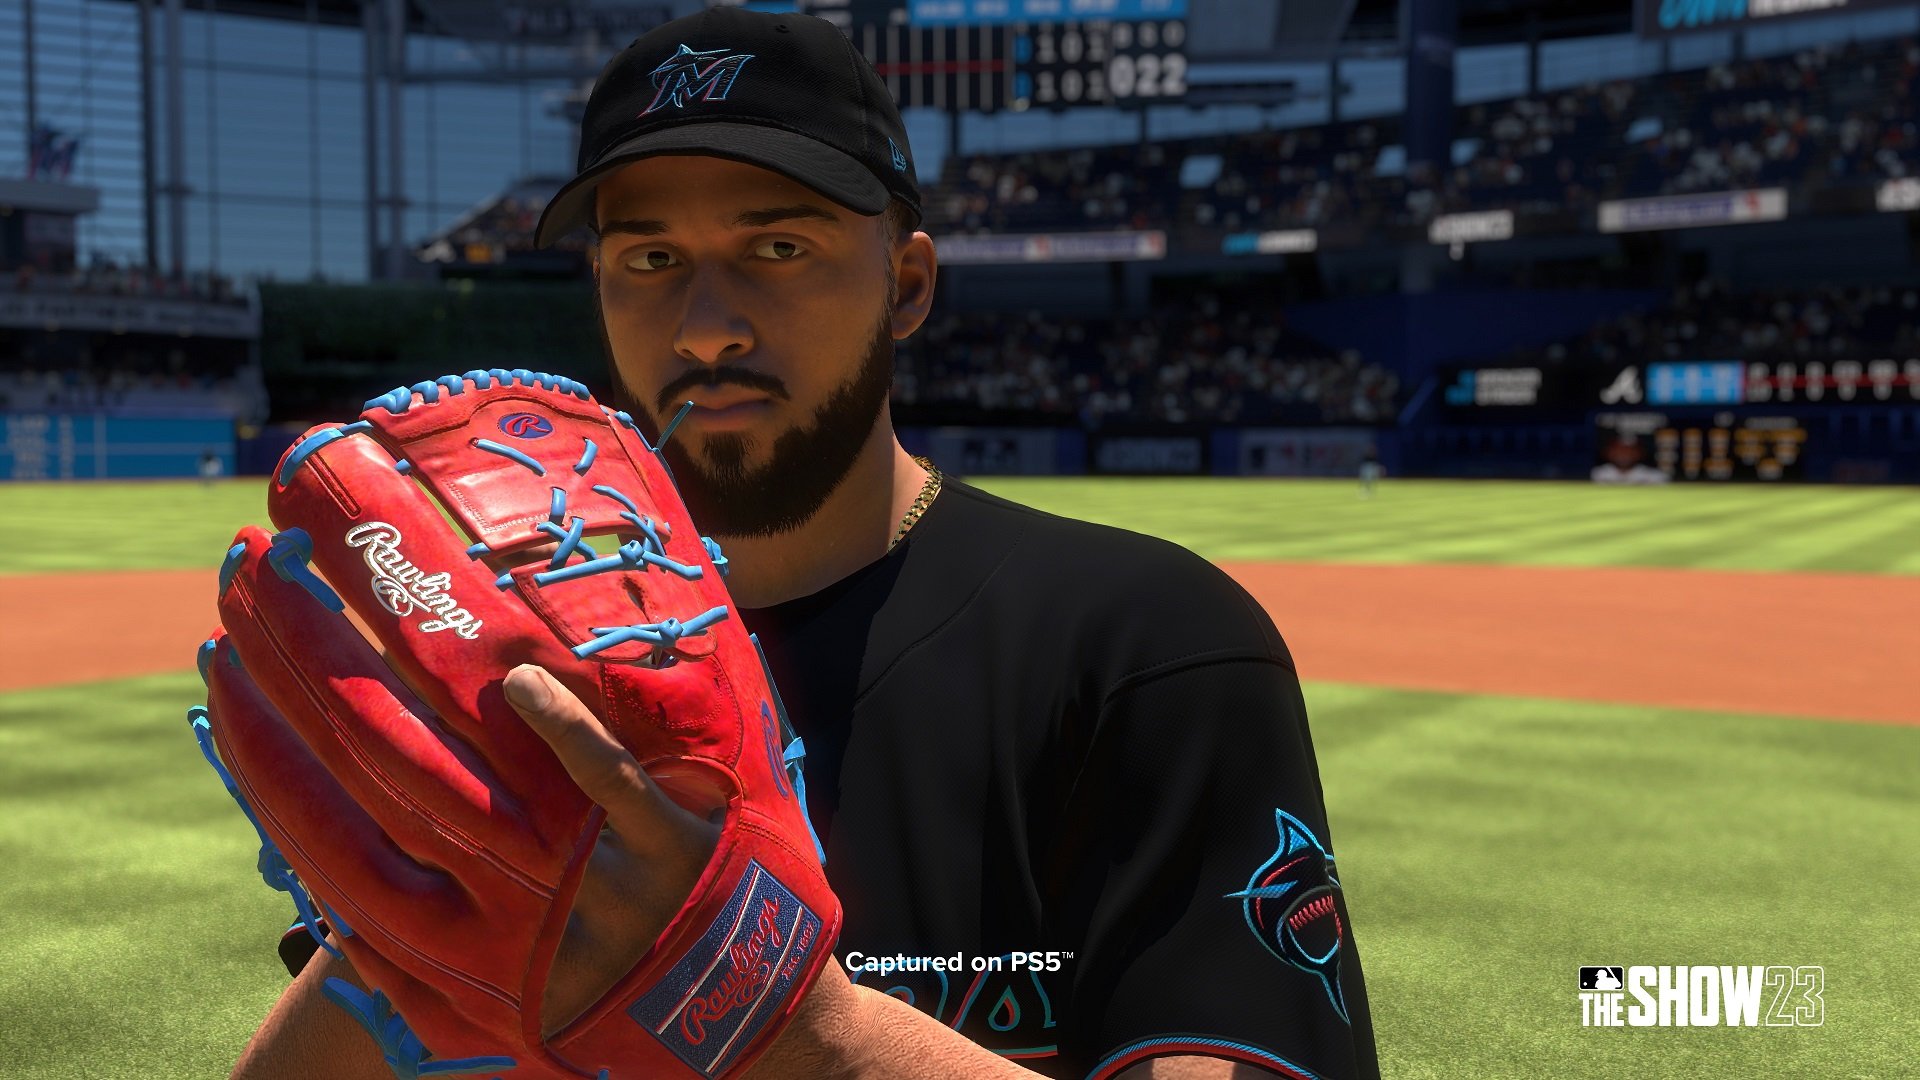 MLB The Show 23 Pitcher